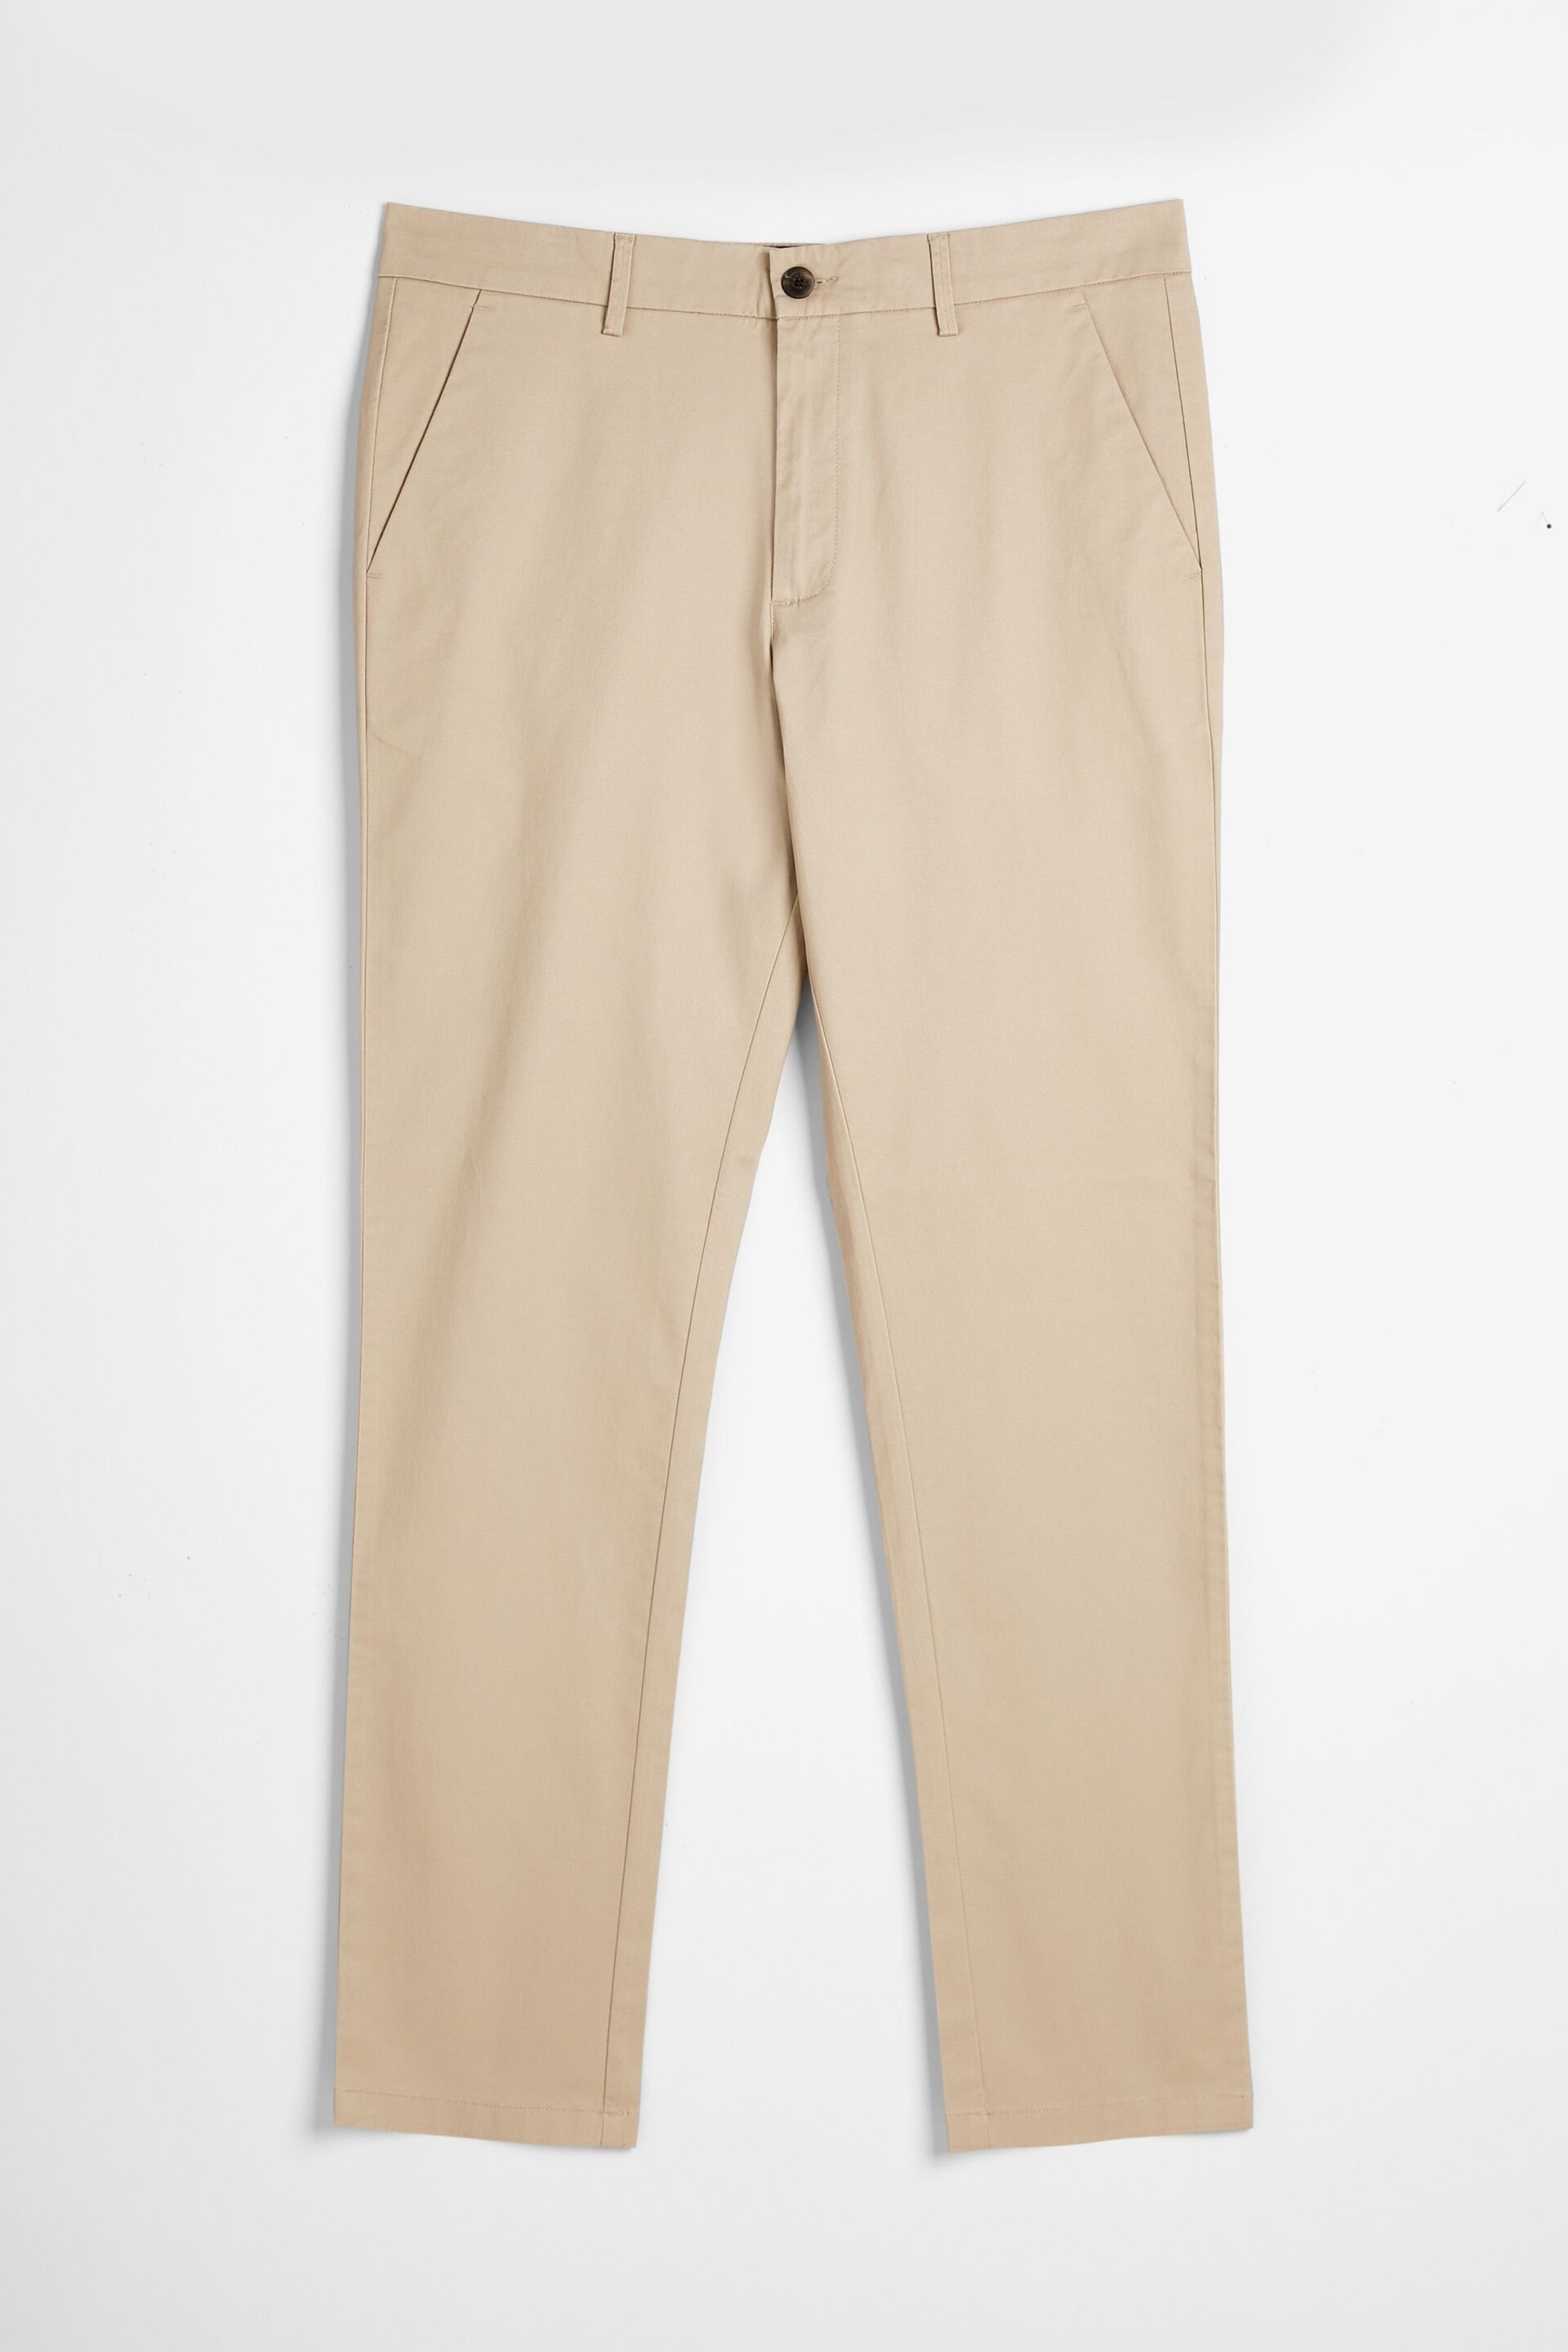 MOSS Natural Tailored Chino Trousers - Image 4 of 4